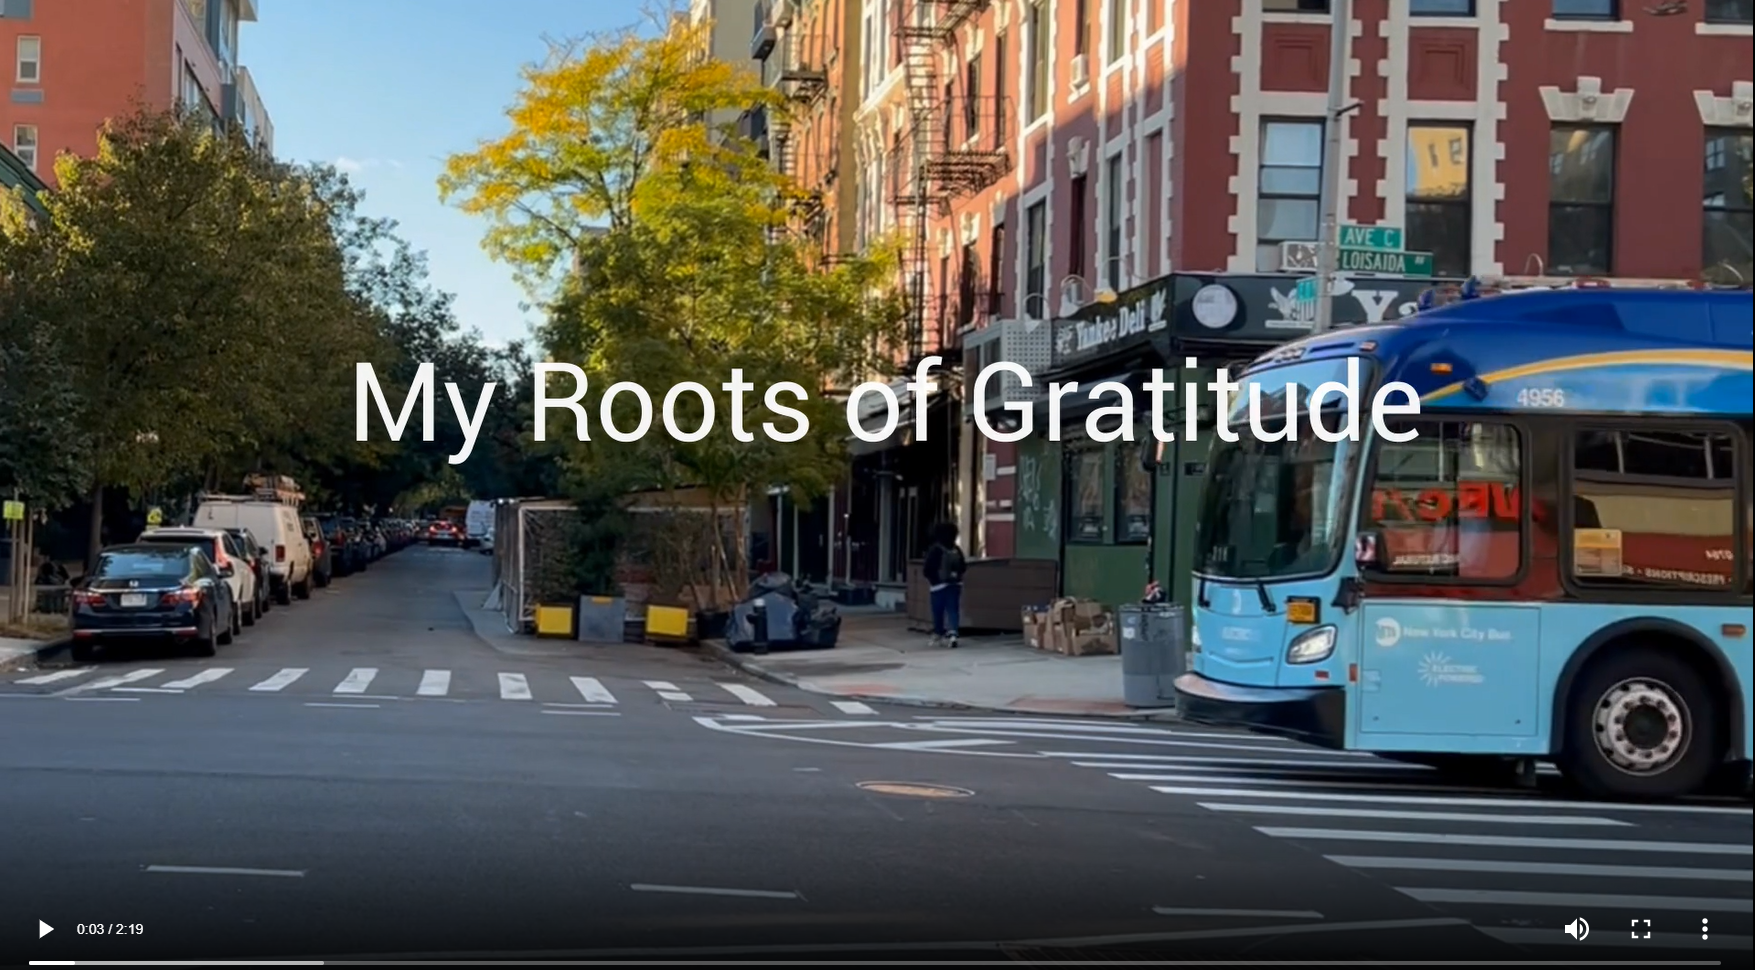 A street in New York City with cars and a bus. Title reads, "My Roots of Gratitude".